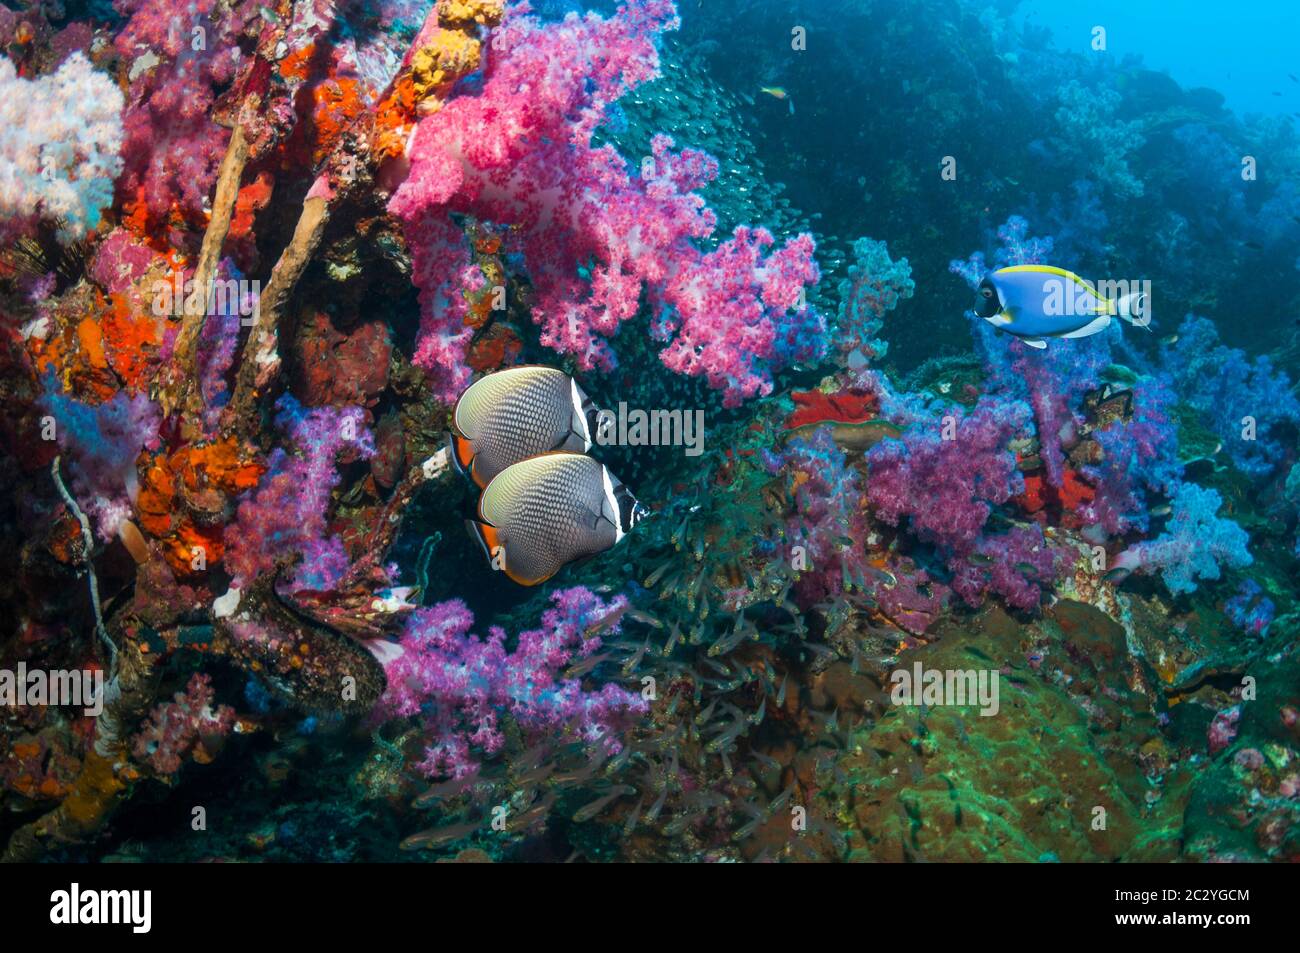 Coral reef scenery with Redtail butterflyfish [Chaetodon collare] and soft corals [Dendronepthya sp.].  Andaman Sea, Thaiand. Stock Photo